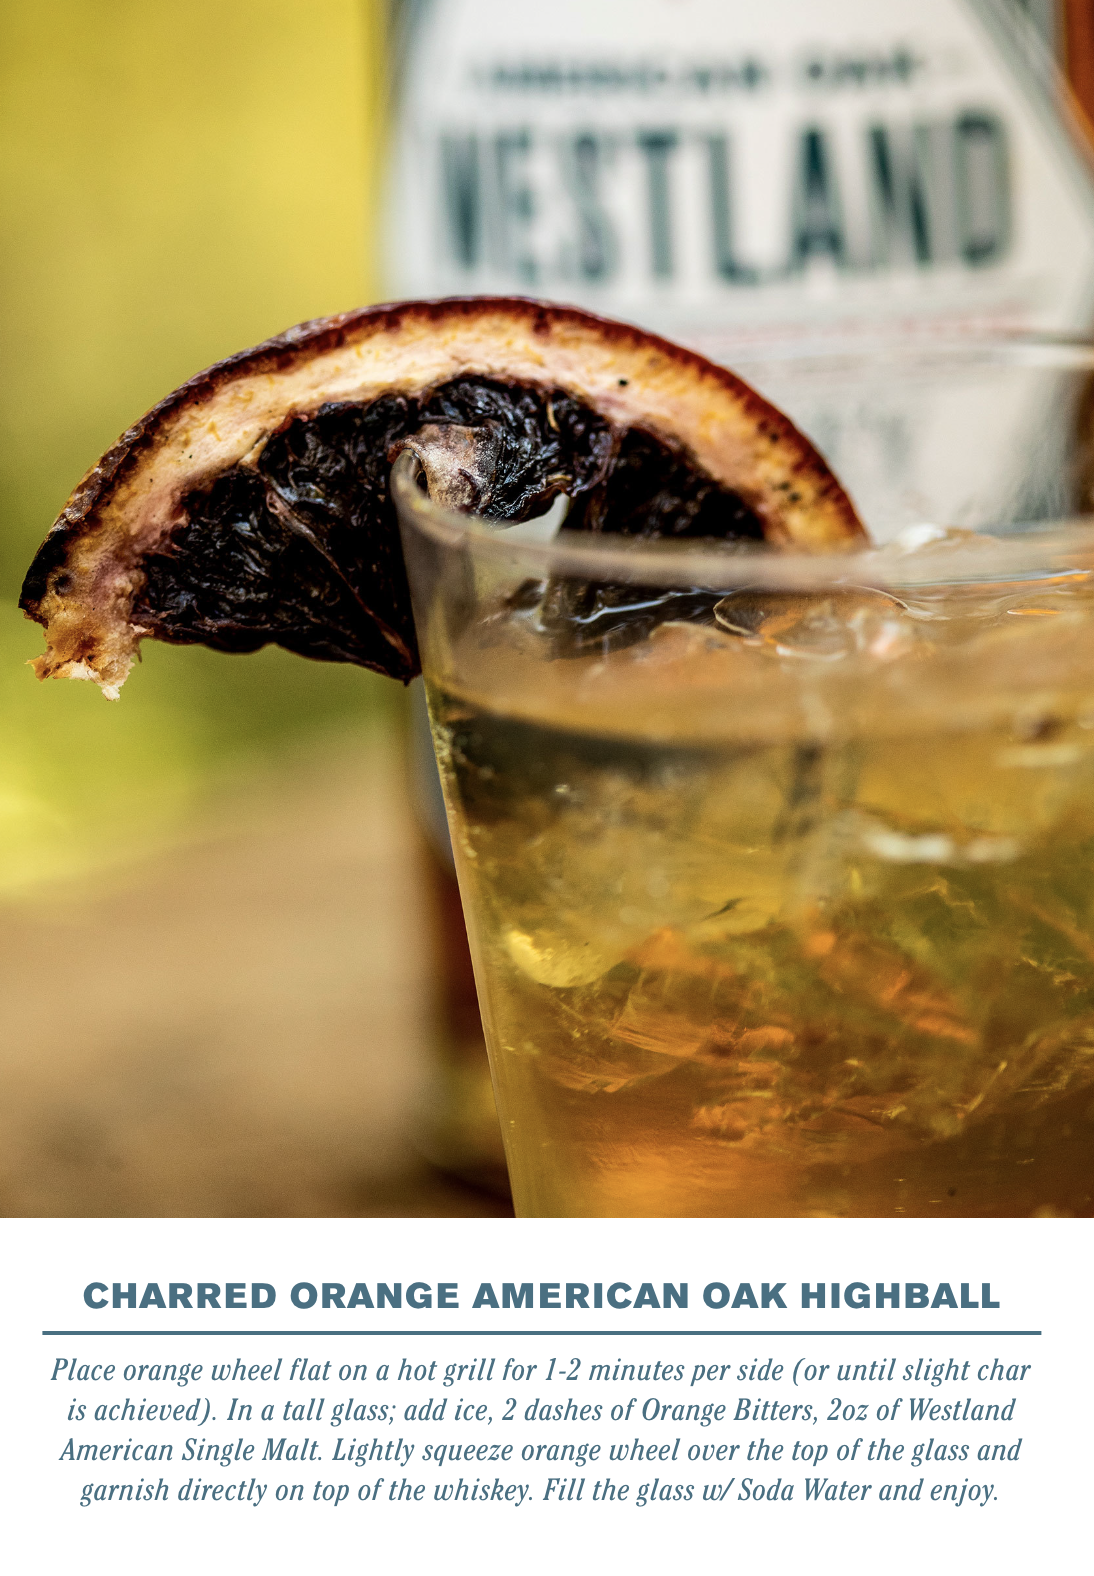  CHARRED ORANGE AMERICAN OAK HIGHBALL    Place orange wheel flat on hot grill for 1-2 minutes per side (or until slight char is achieved). In a tall glass add ice, 2 dashes of Orange Bitters, 2oz of Westland American Single Malt. Lightly squeeze oran